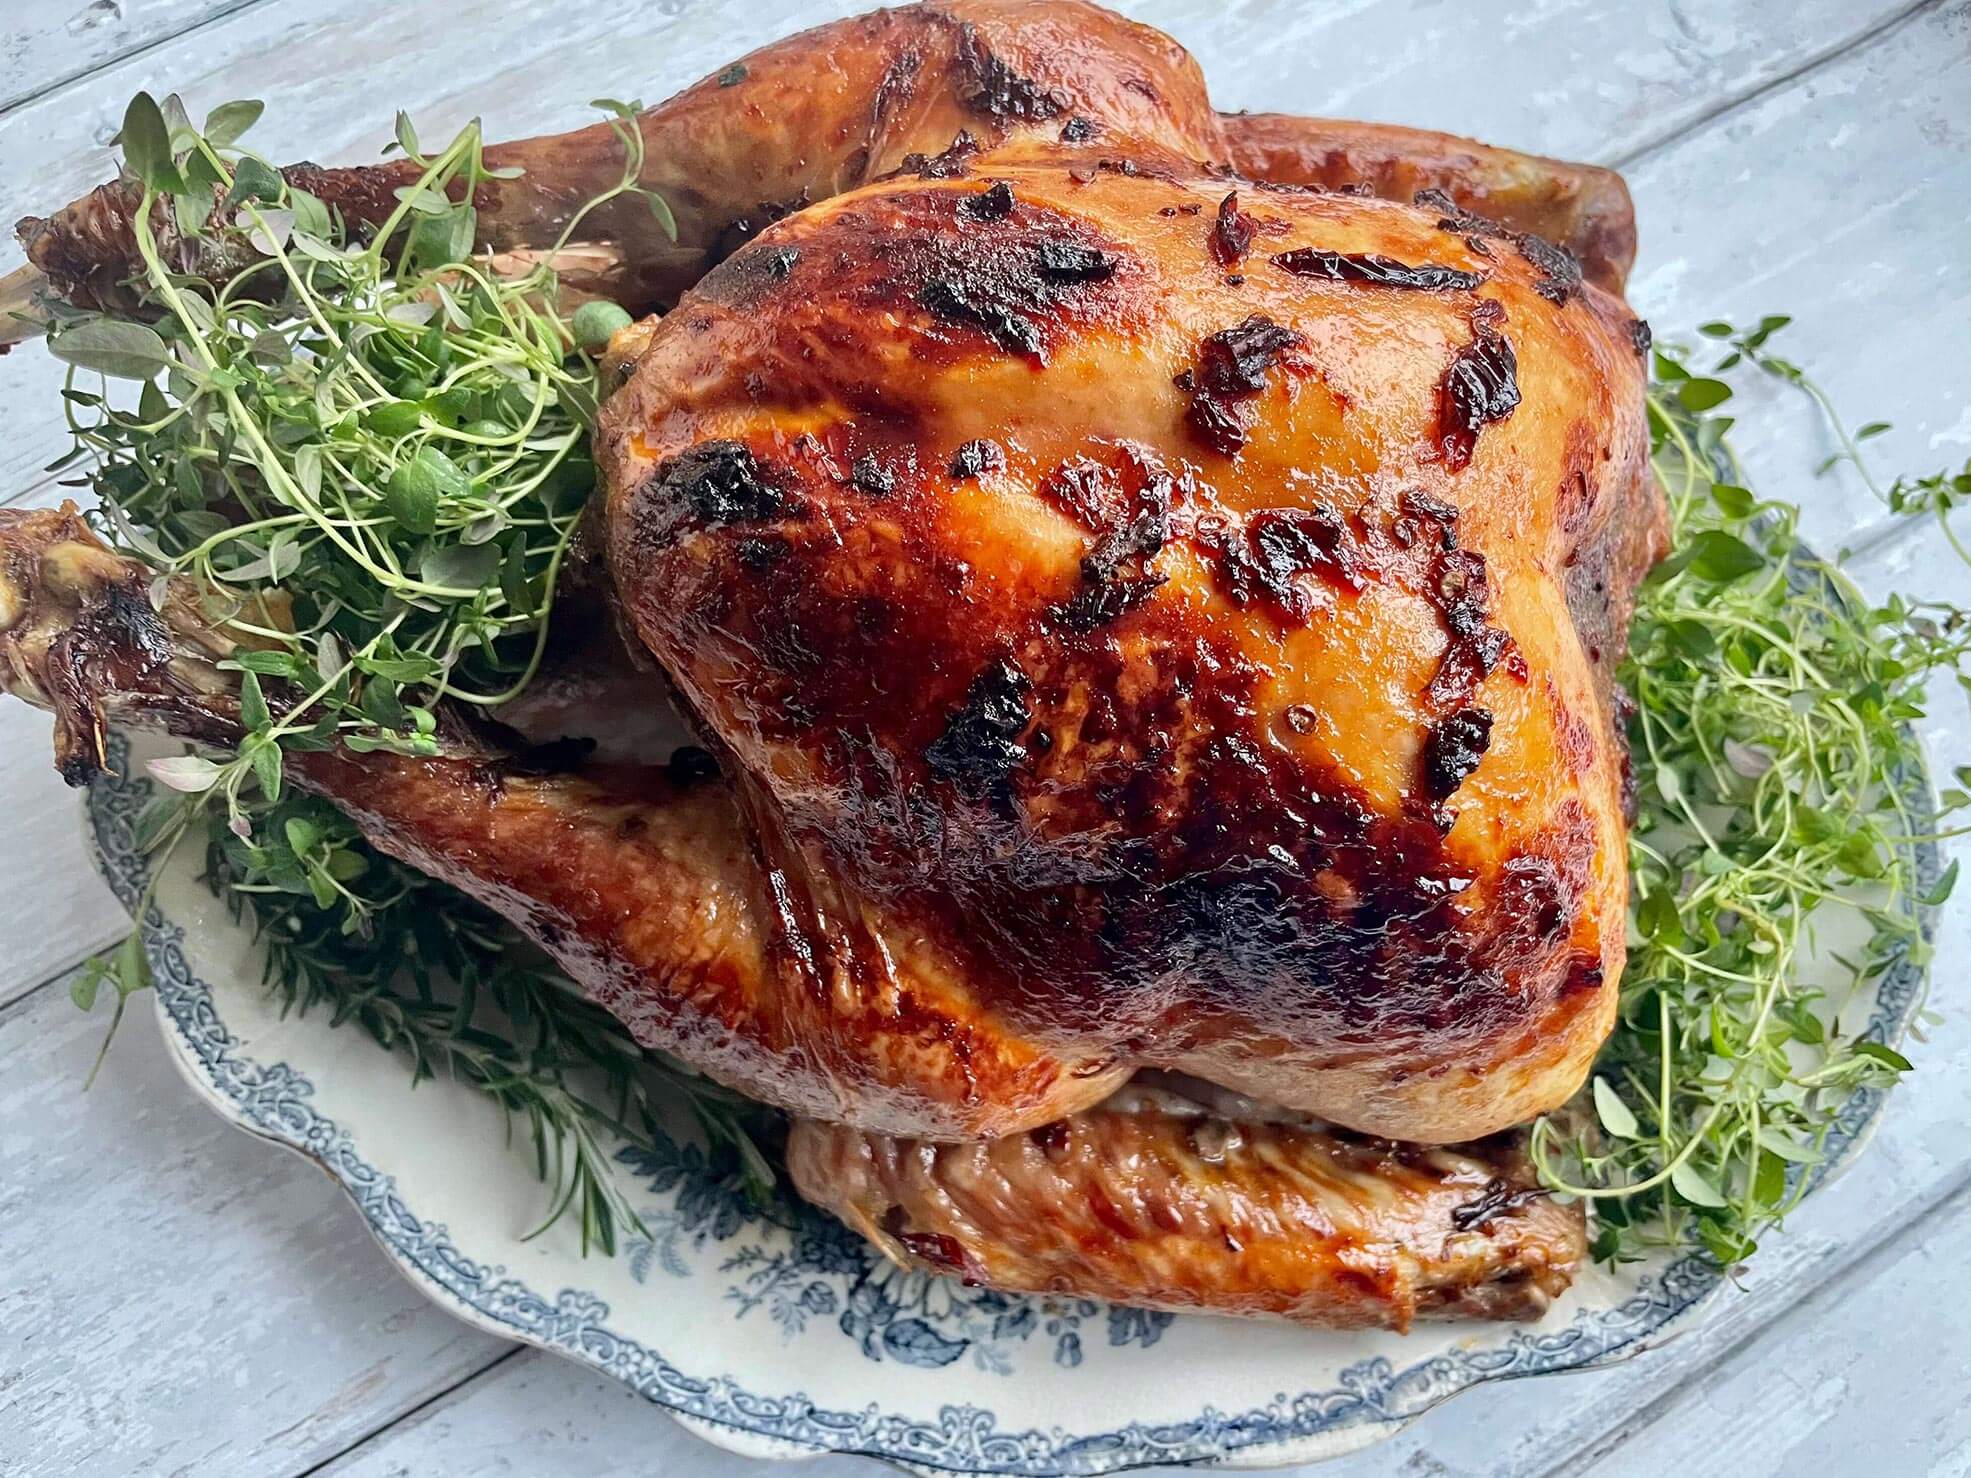 Maple, Clementine and Chipotle Glazed Turkey